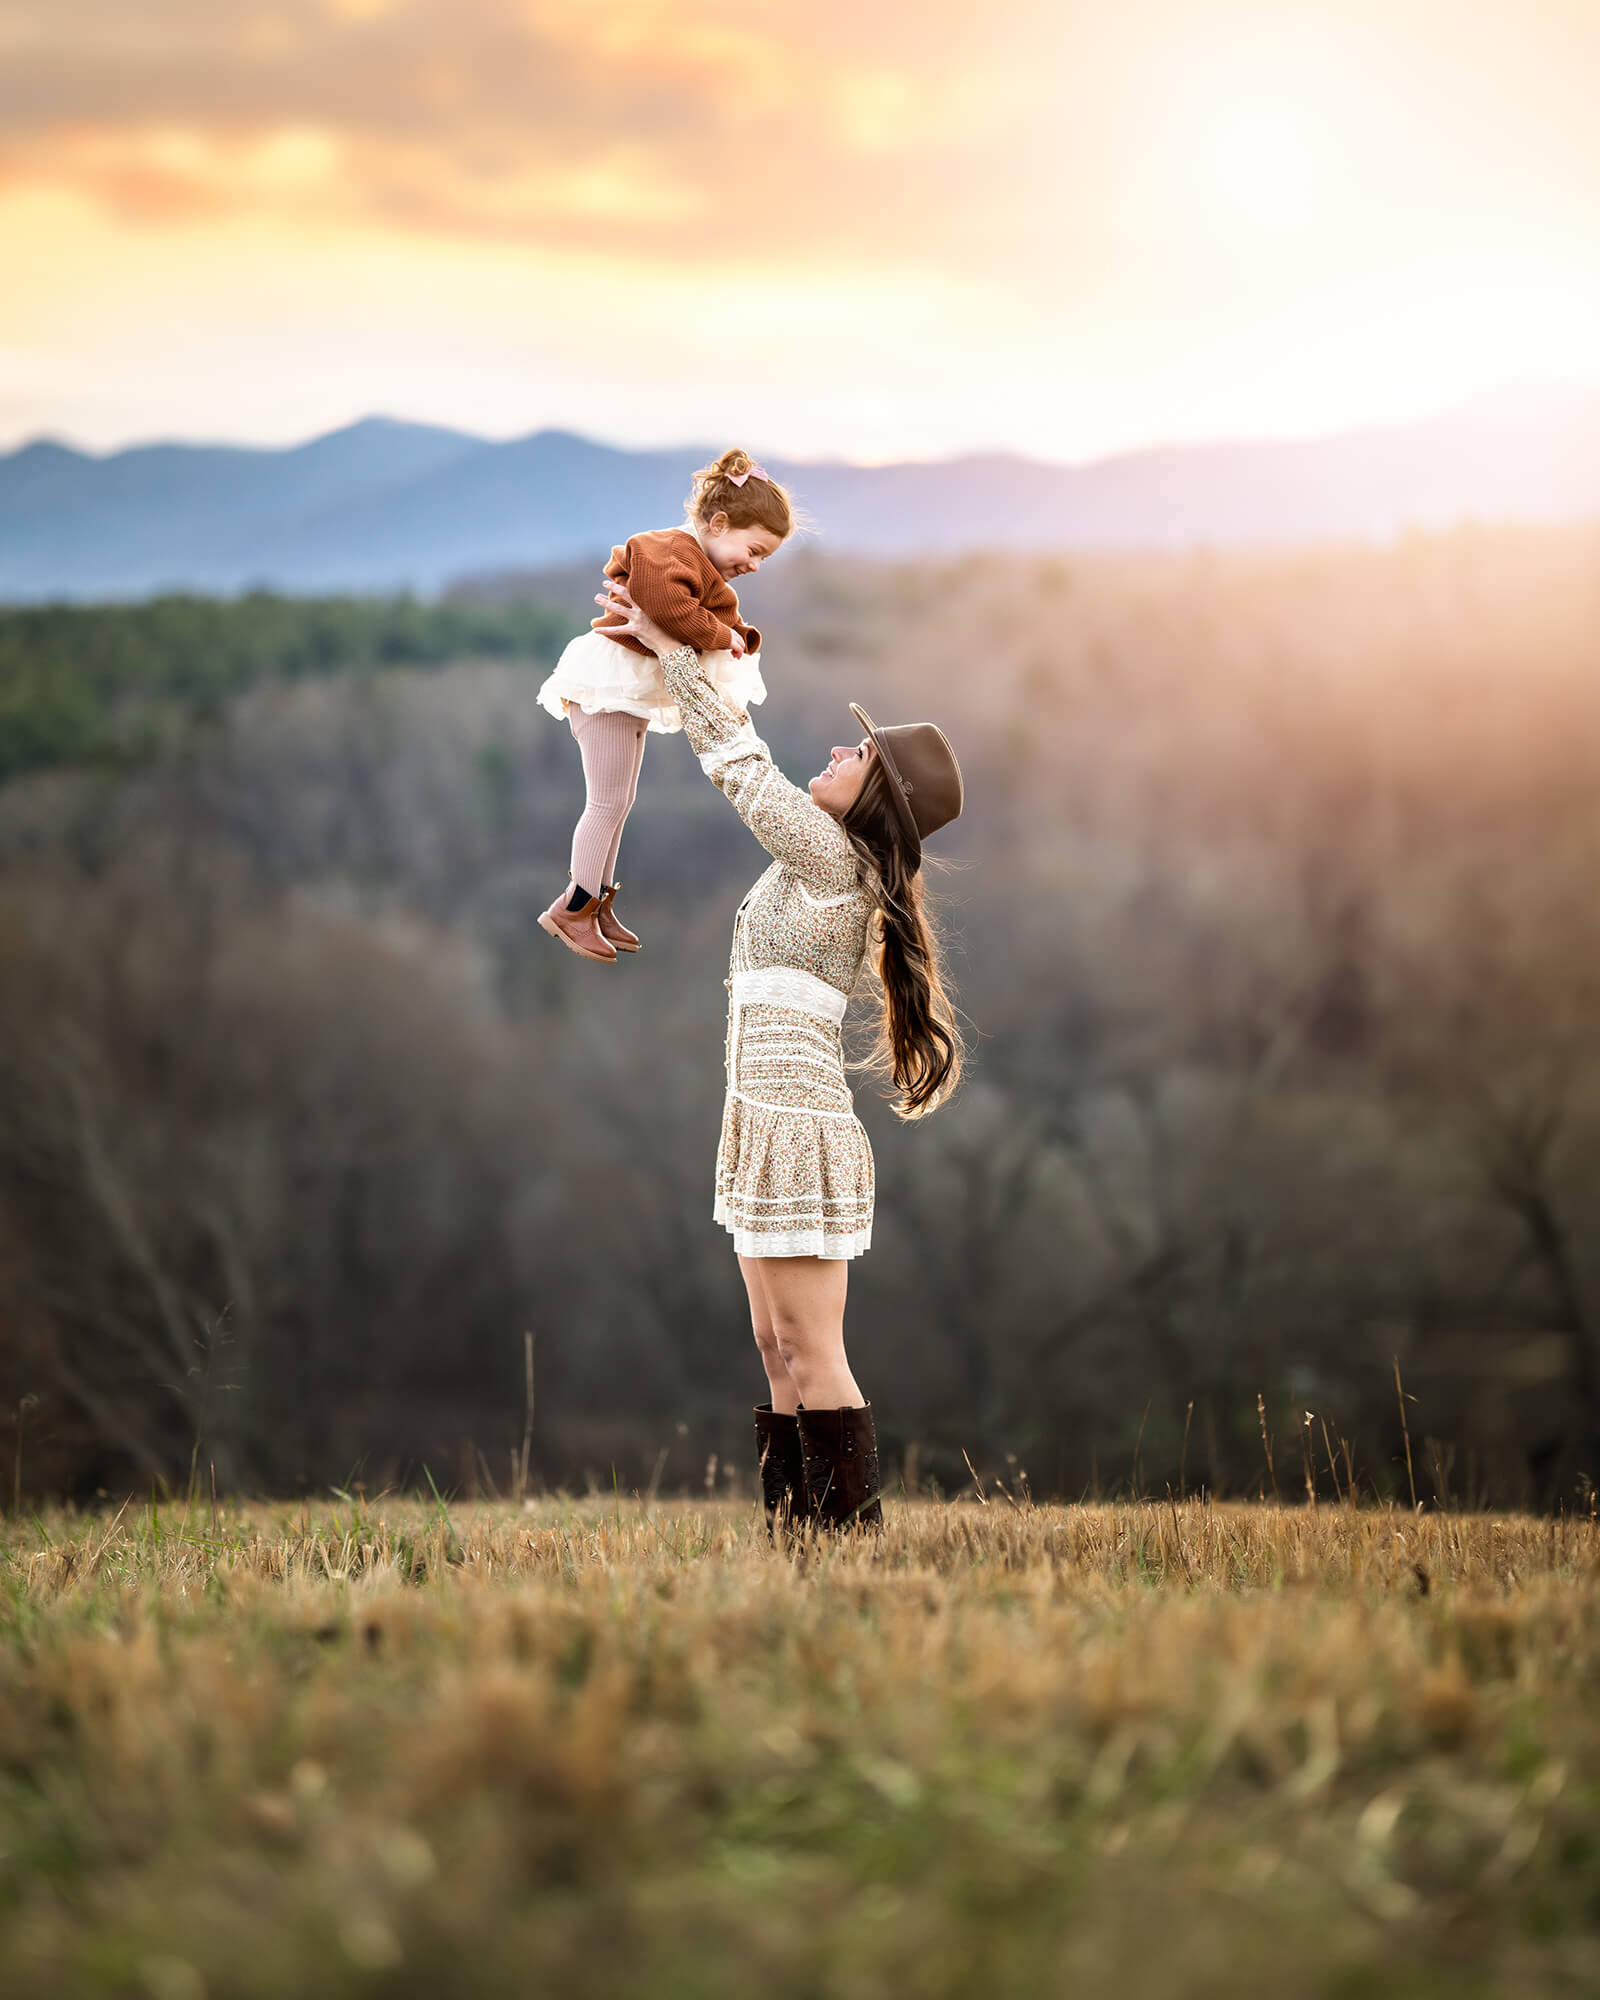 A mom twirling her daughter in a grassy field in front of the mountains